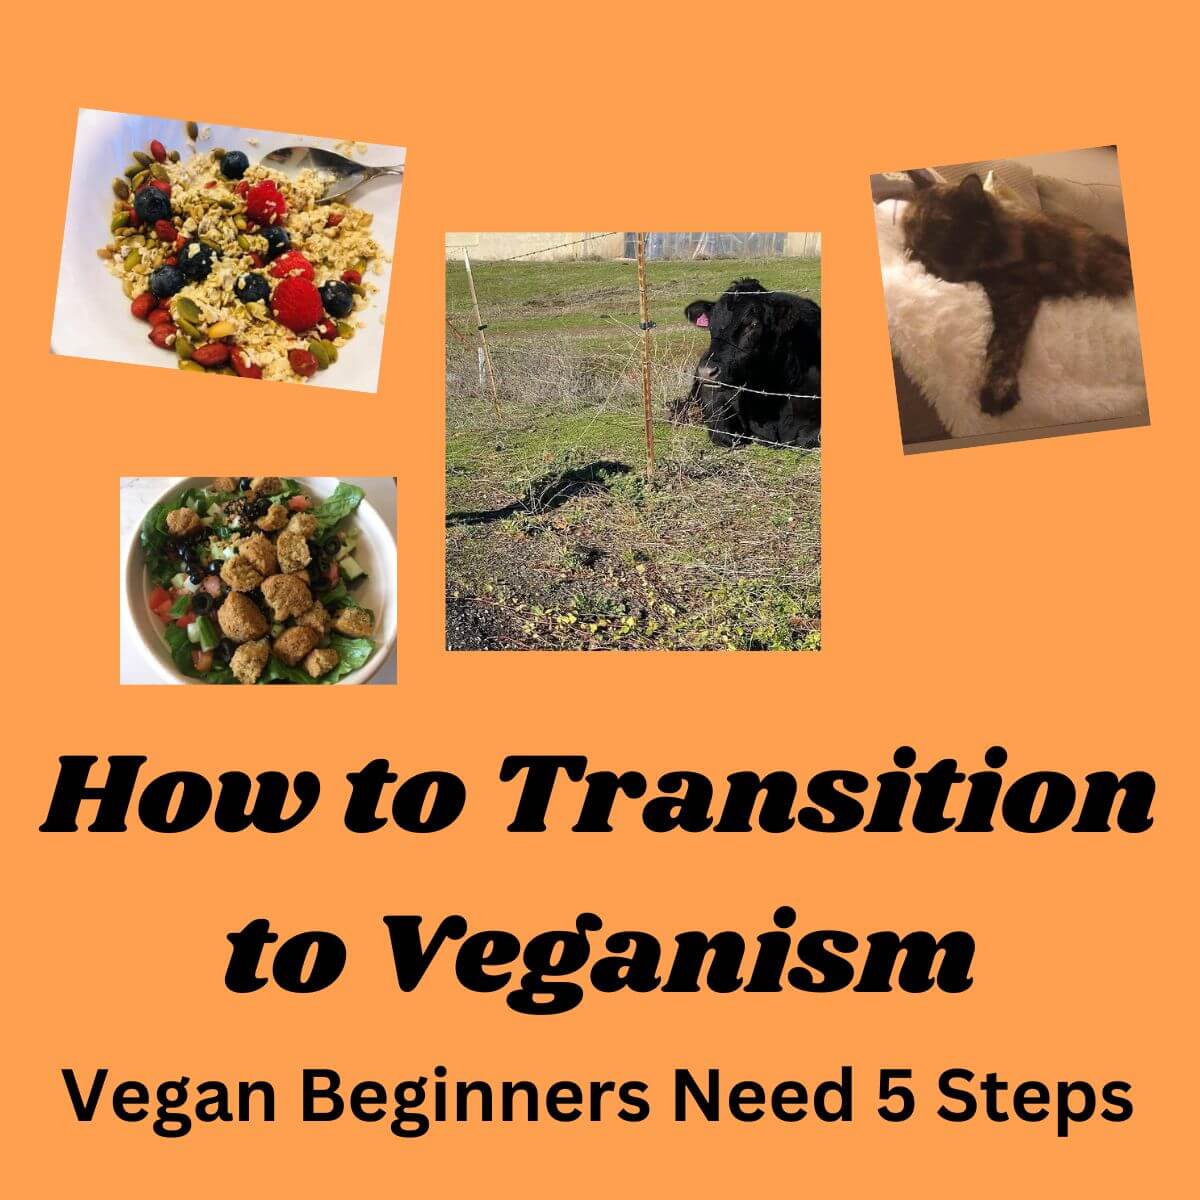 pictures include a cow, cat, oatmeal with berries, nuts and seeds, and a salad with falafels. Text reads: How to Transition to Veganism. Vegan Beginners Need 5 Steps